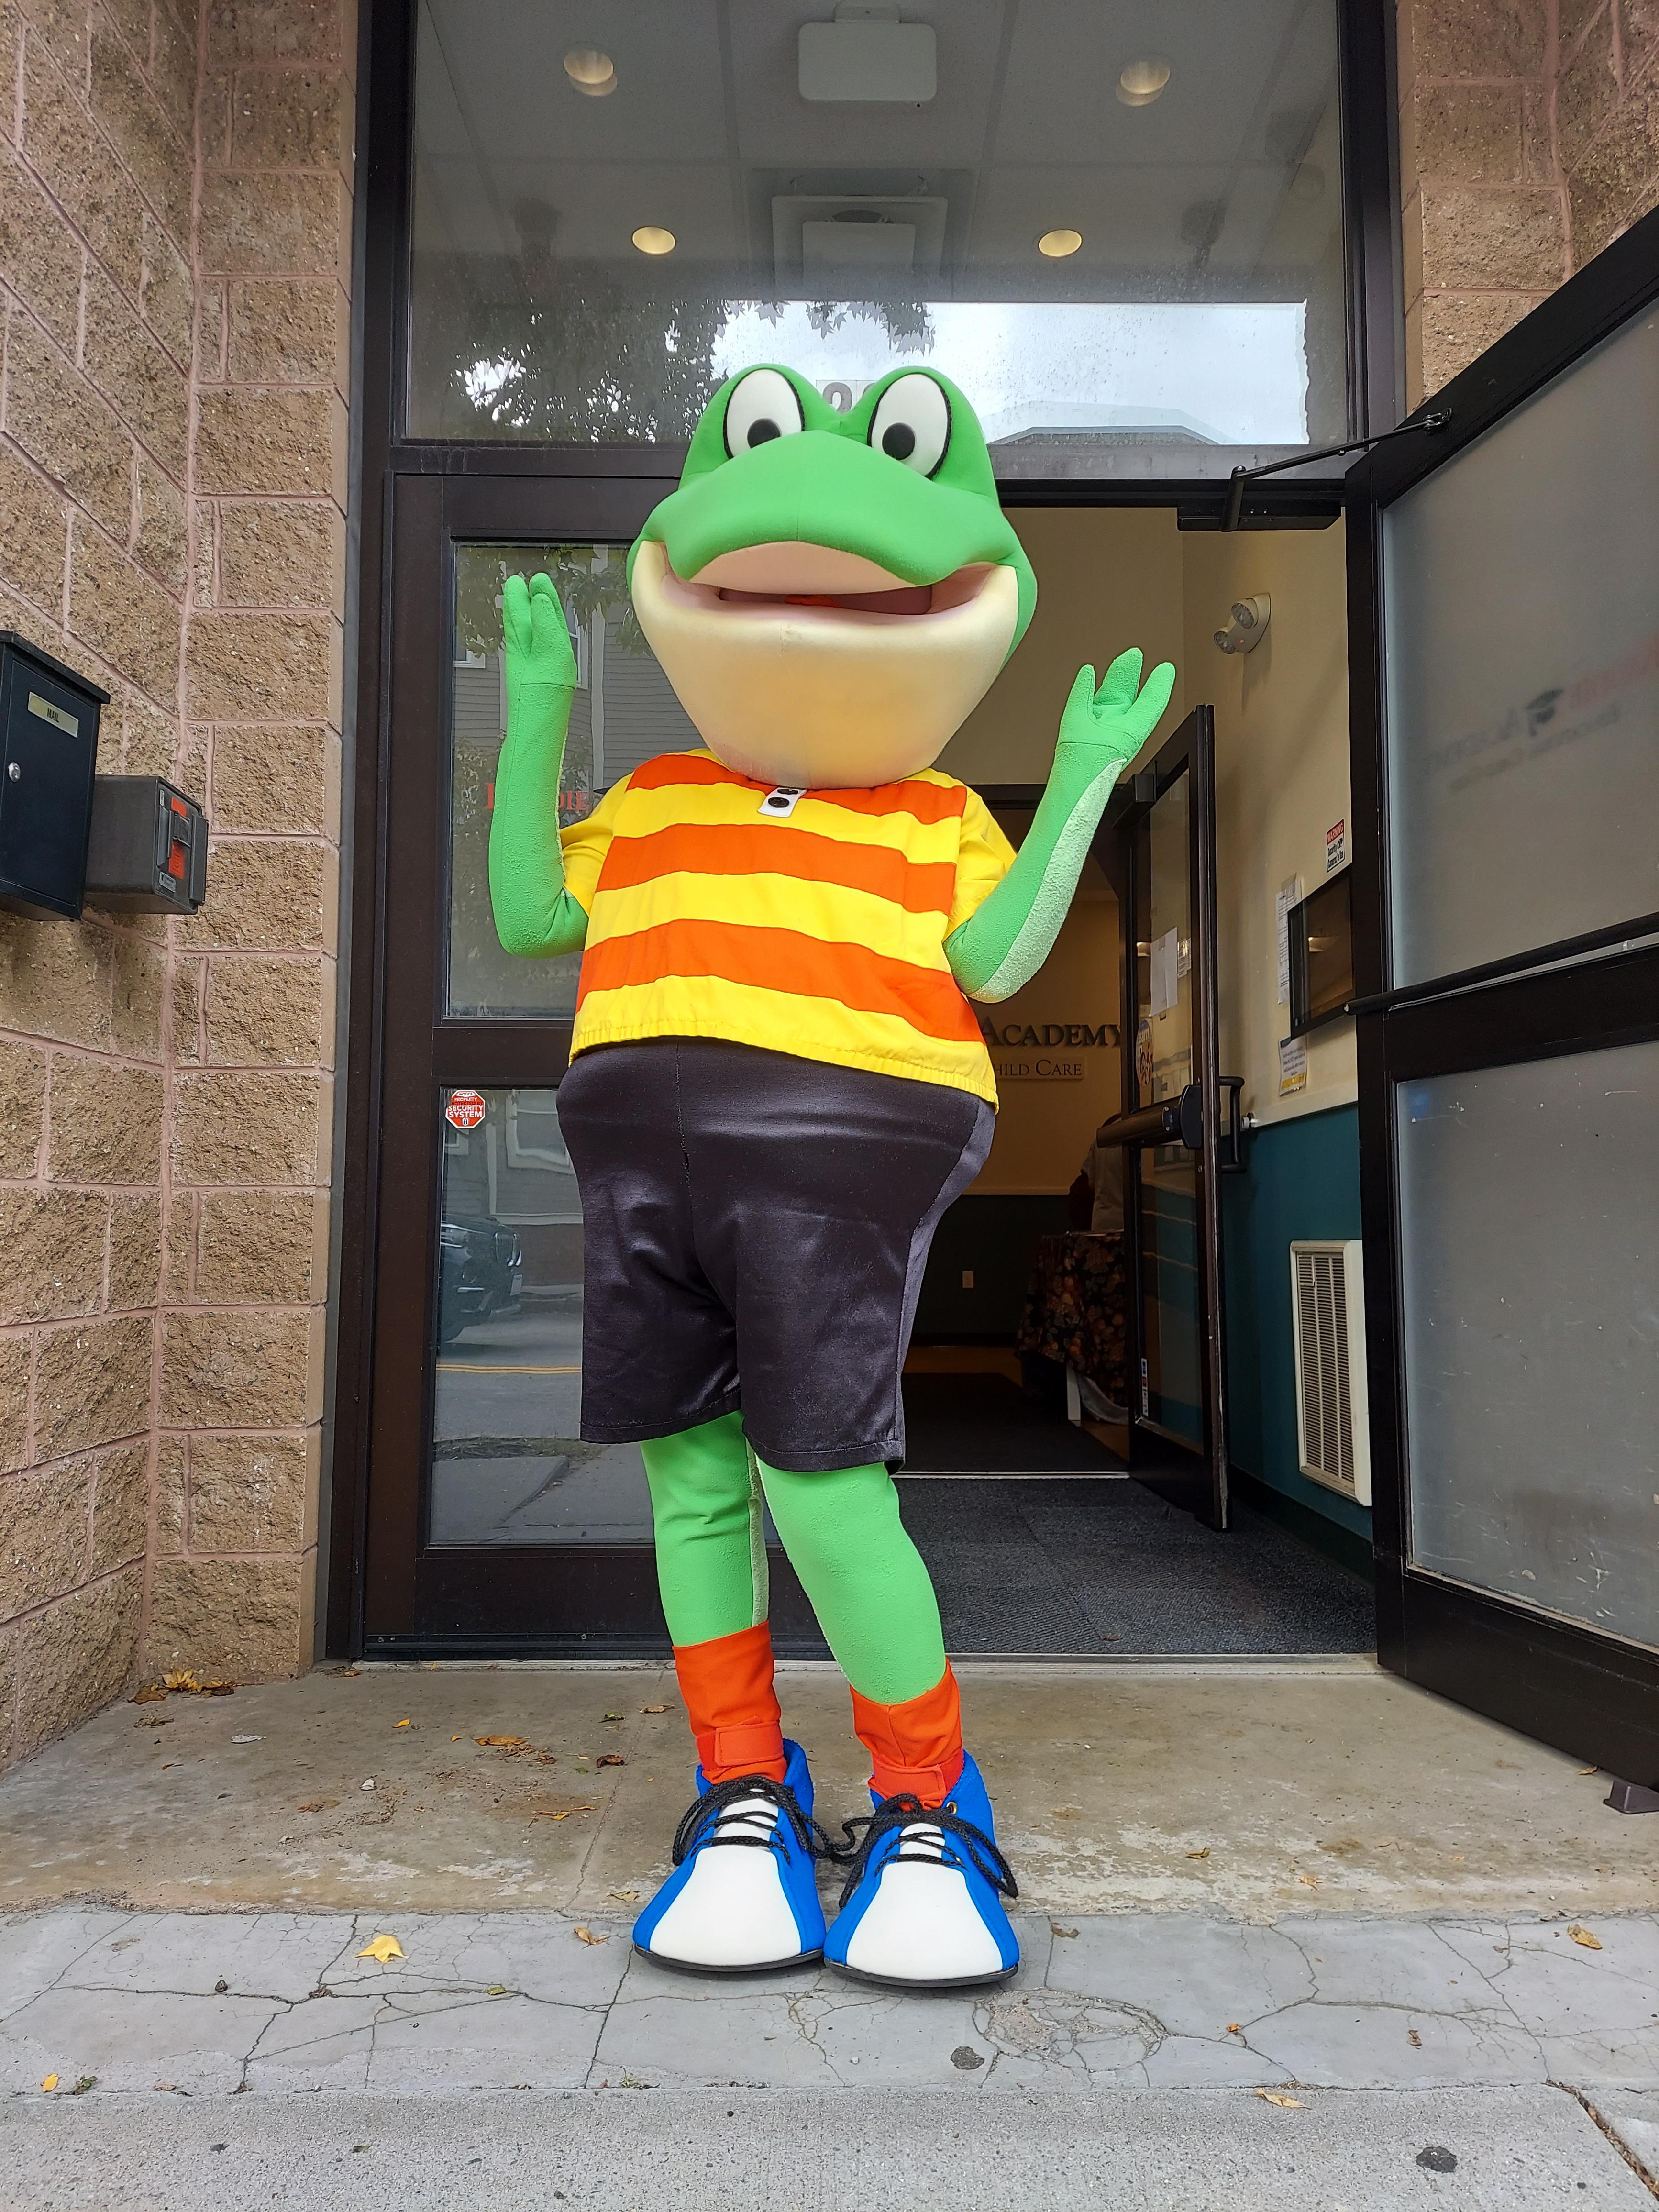 Froggy came to visit!